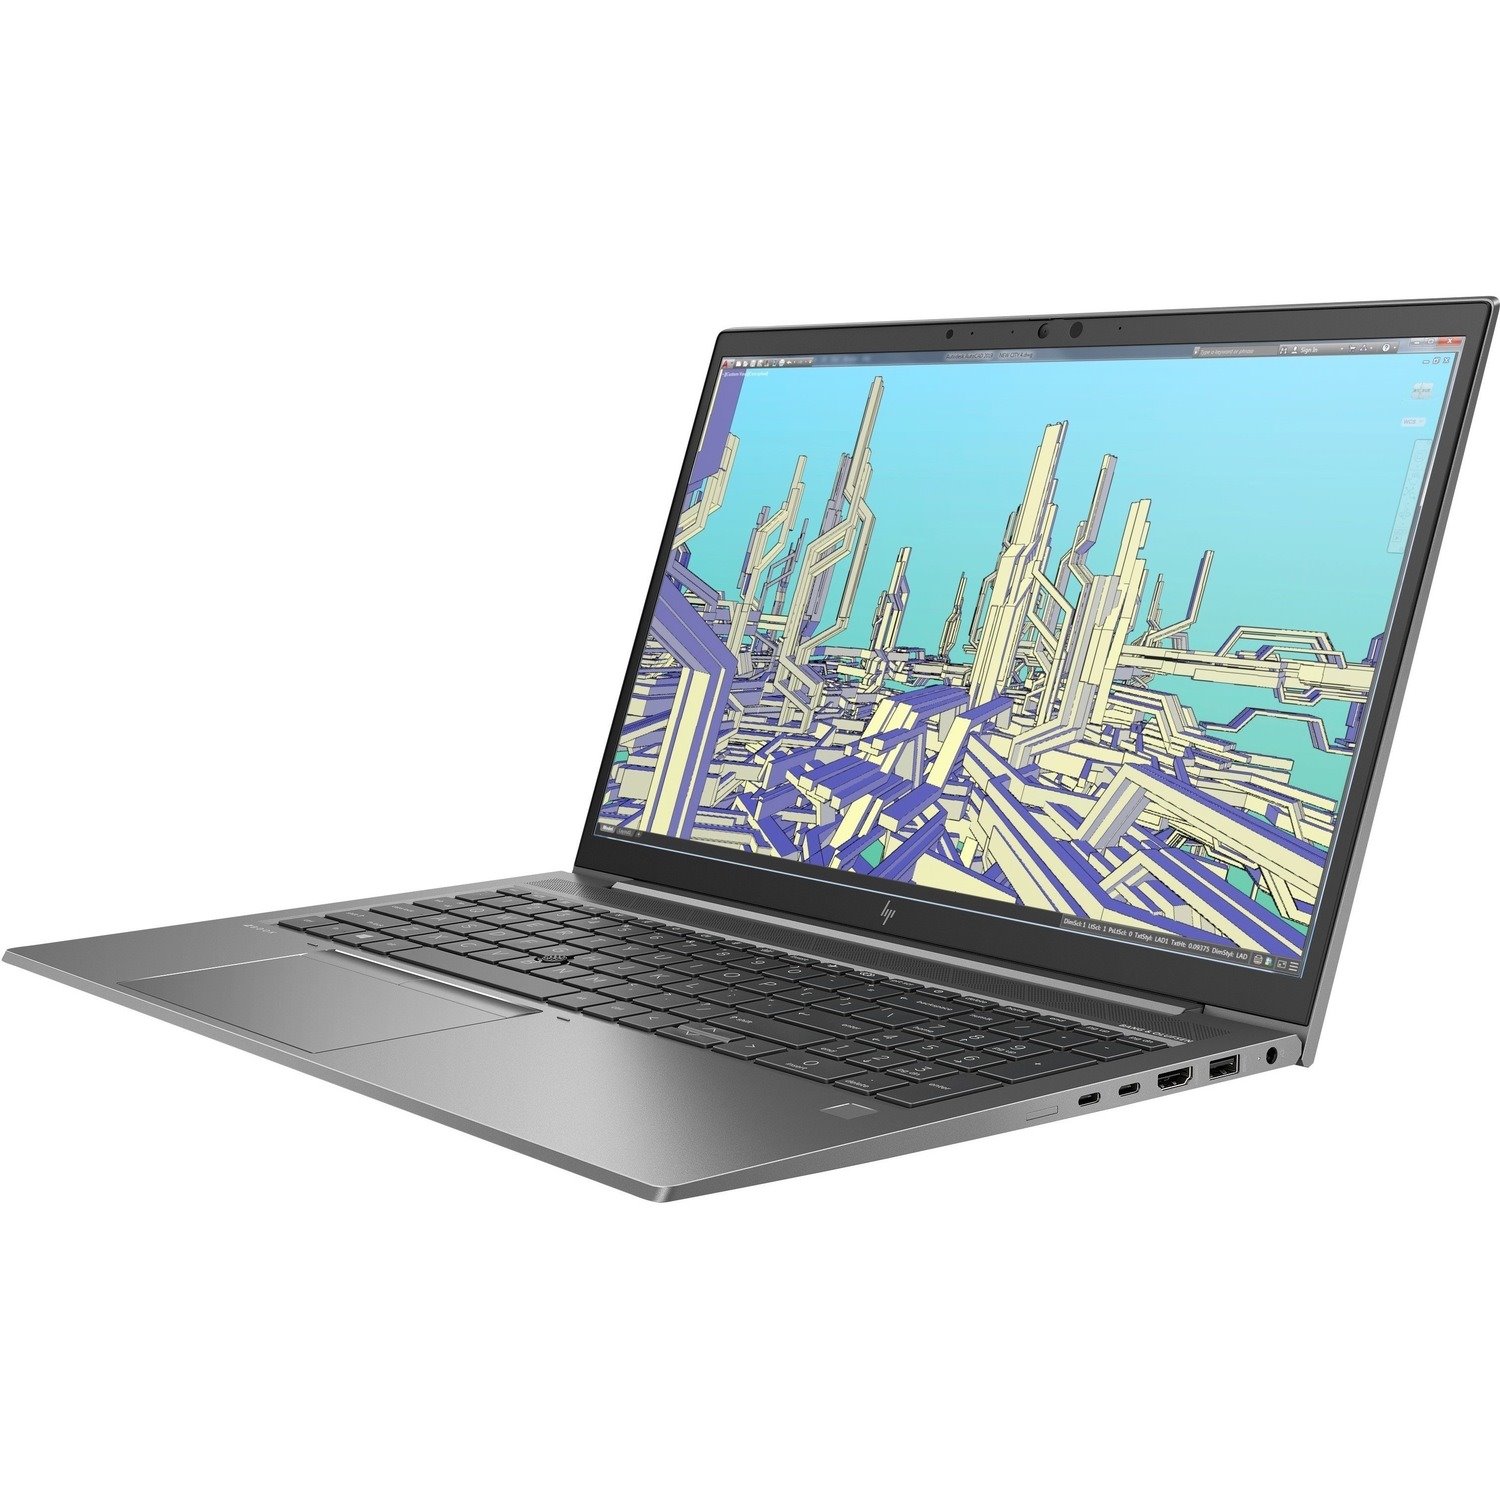 HPI SOURCING - NEW ZBook Firefly G8 14" Mobile Workstation - Full HD - Intel Core i5 11th Gen i5-1135G7 - 16 GB - 256 GB SSD